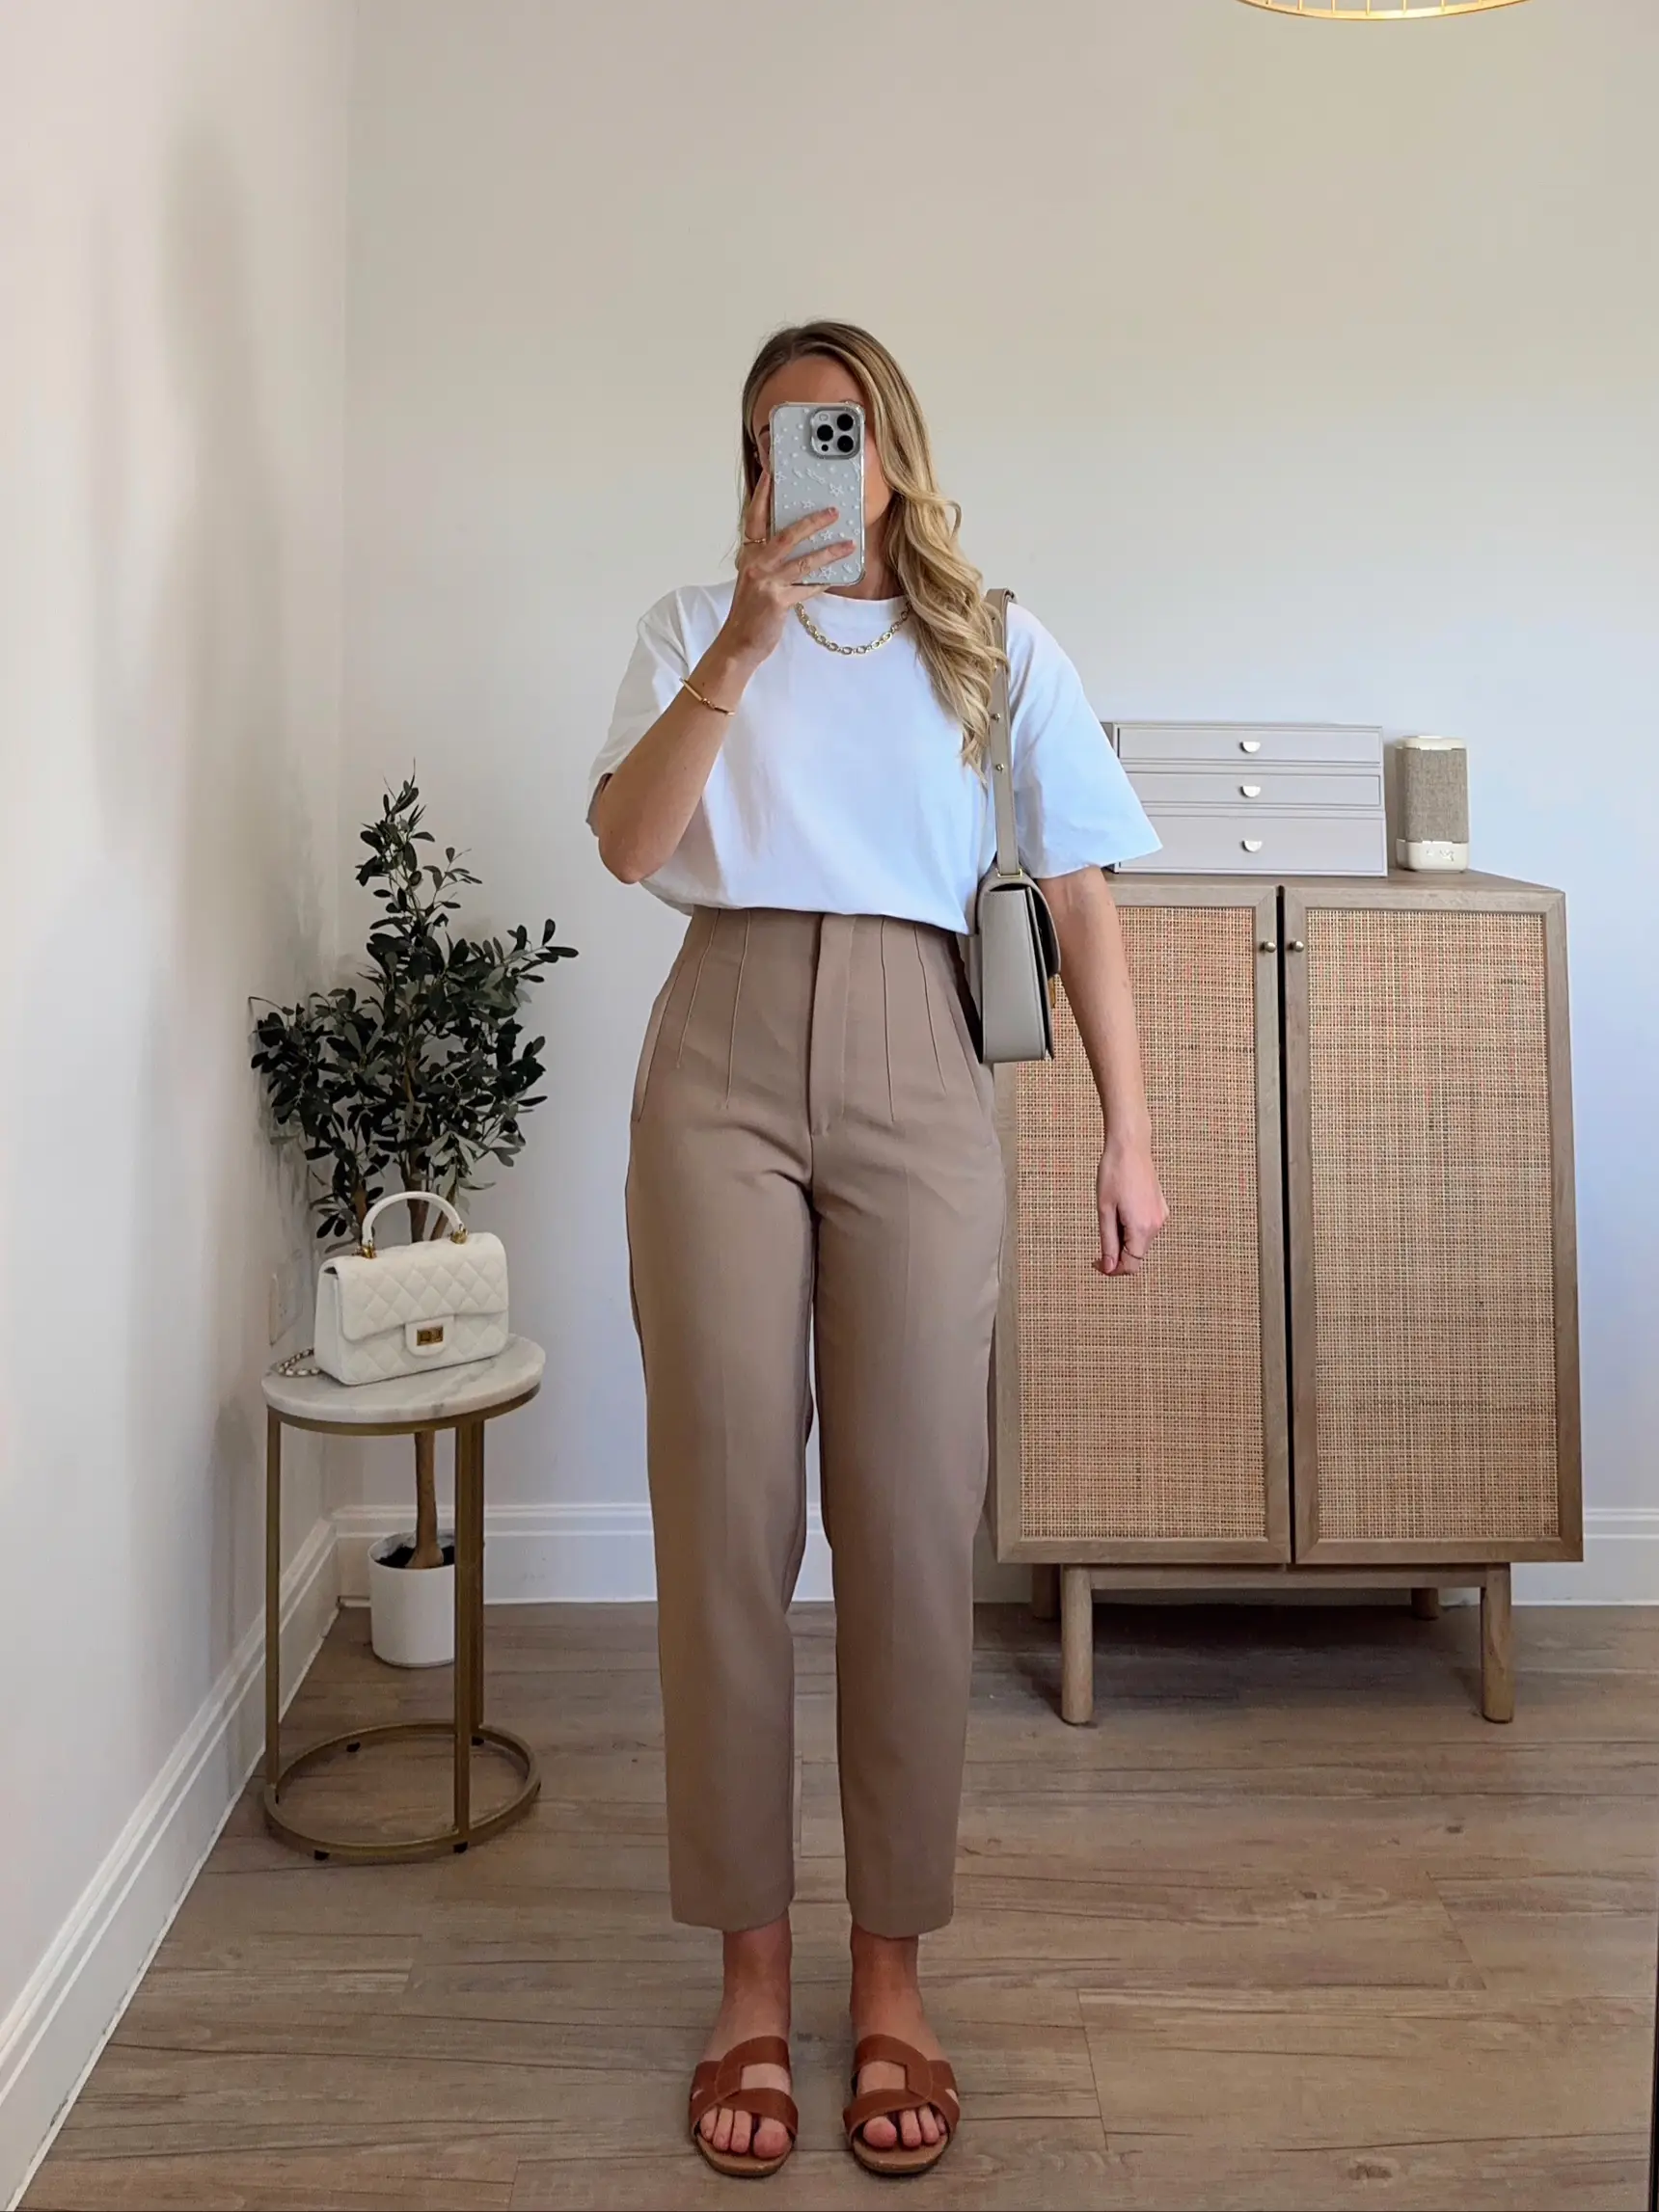 Zara tailored trousers styling  Gallery posted by Emily James